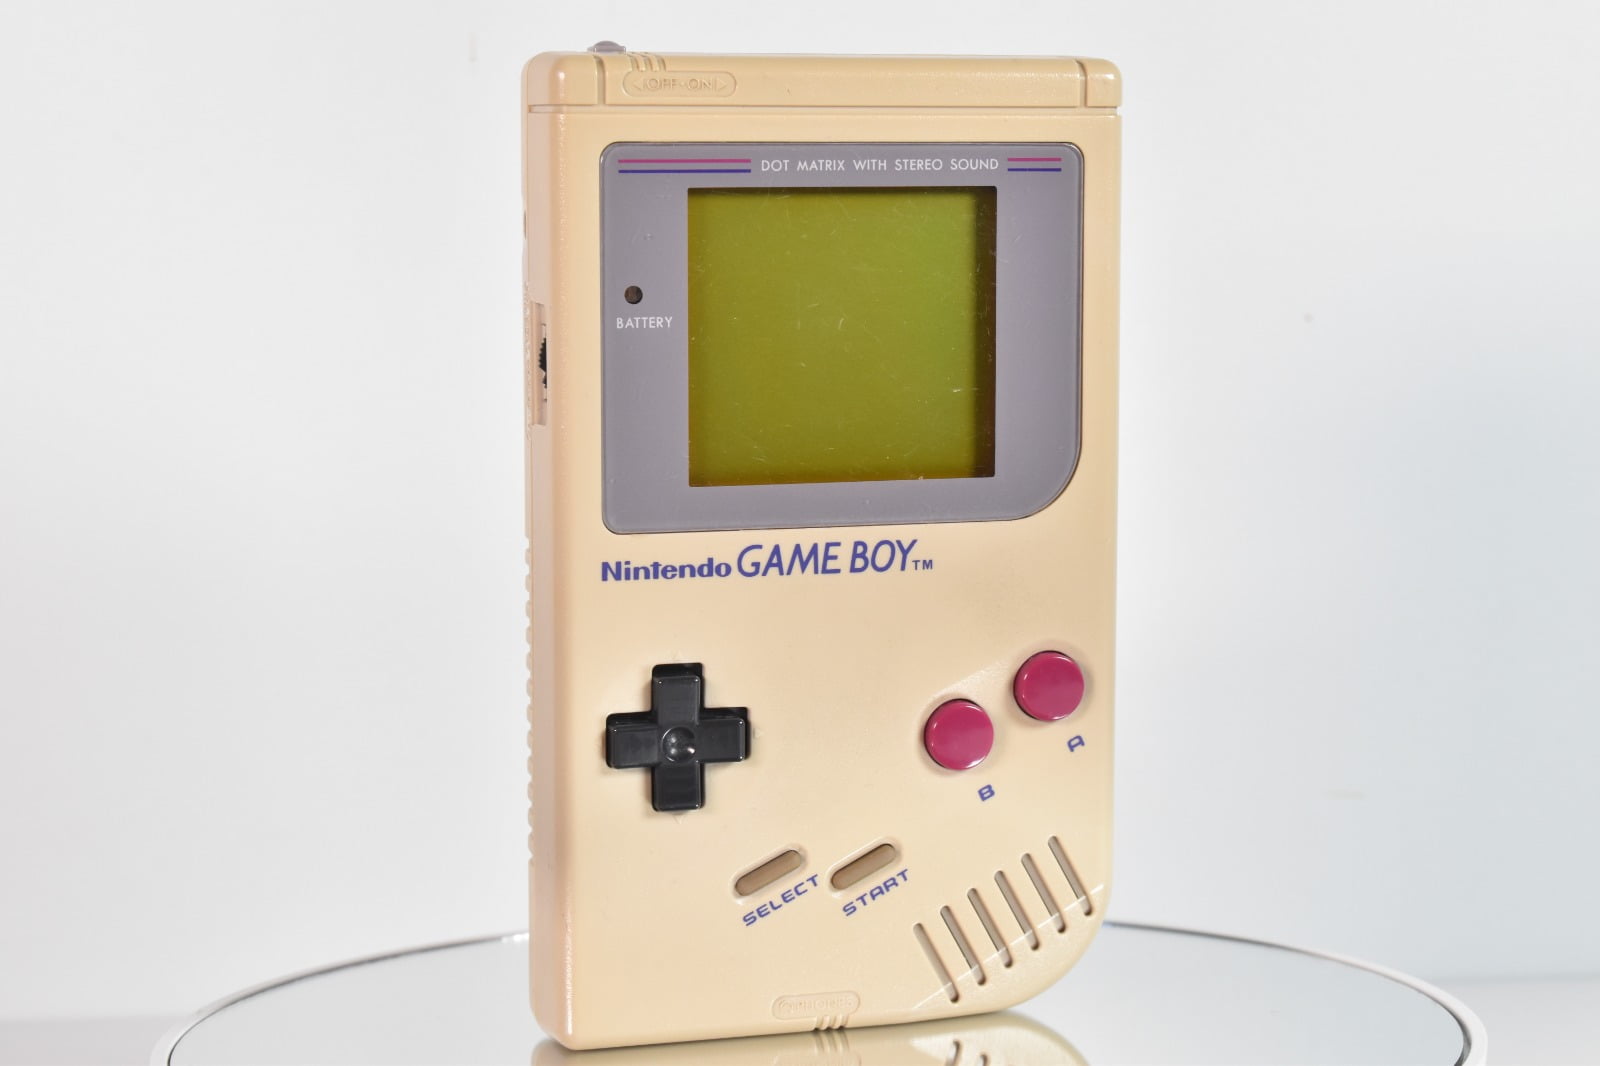 jeans websted opbevaring Original Nintendo Game Boy Console Classic GameBoy Grey - 100% OEM Tested  and Cleaned Works Great, Upgraded with Brand New Shell, SUPER RARE  COLLECTABLE - Walmart.com